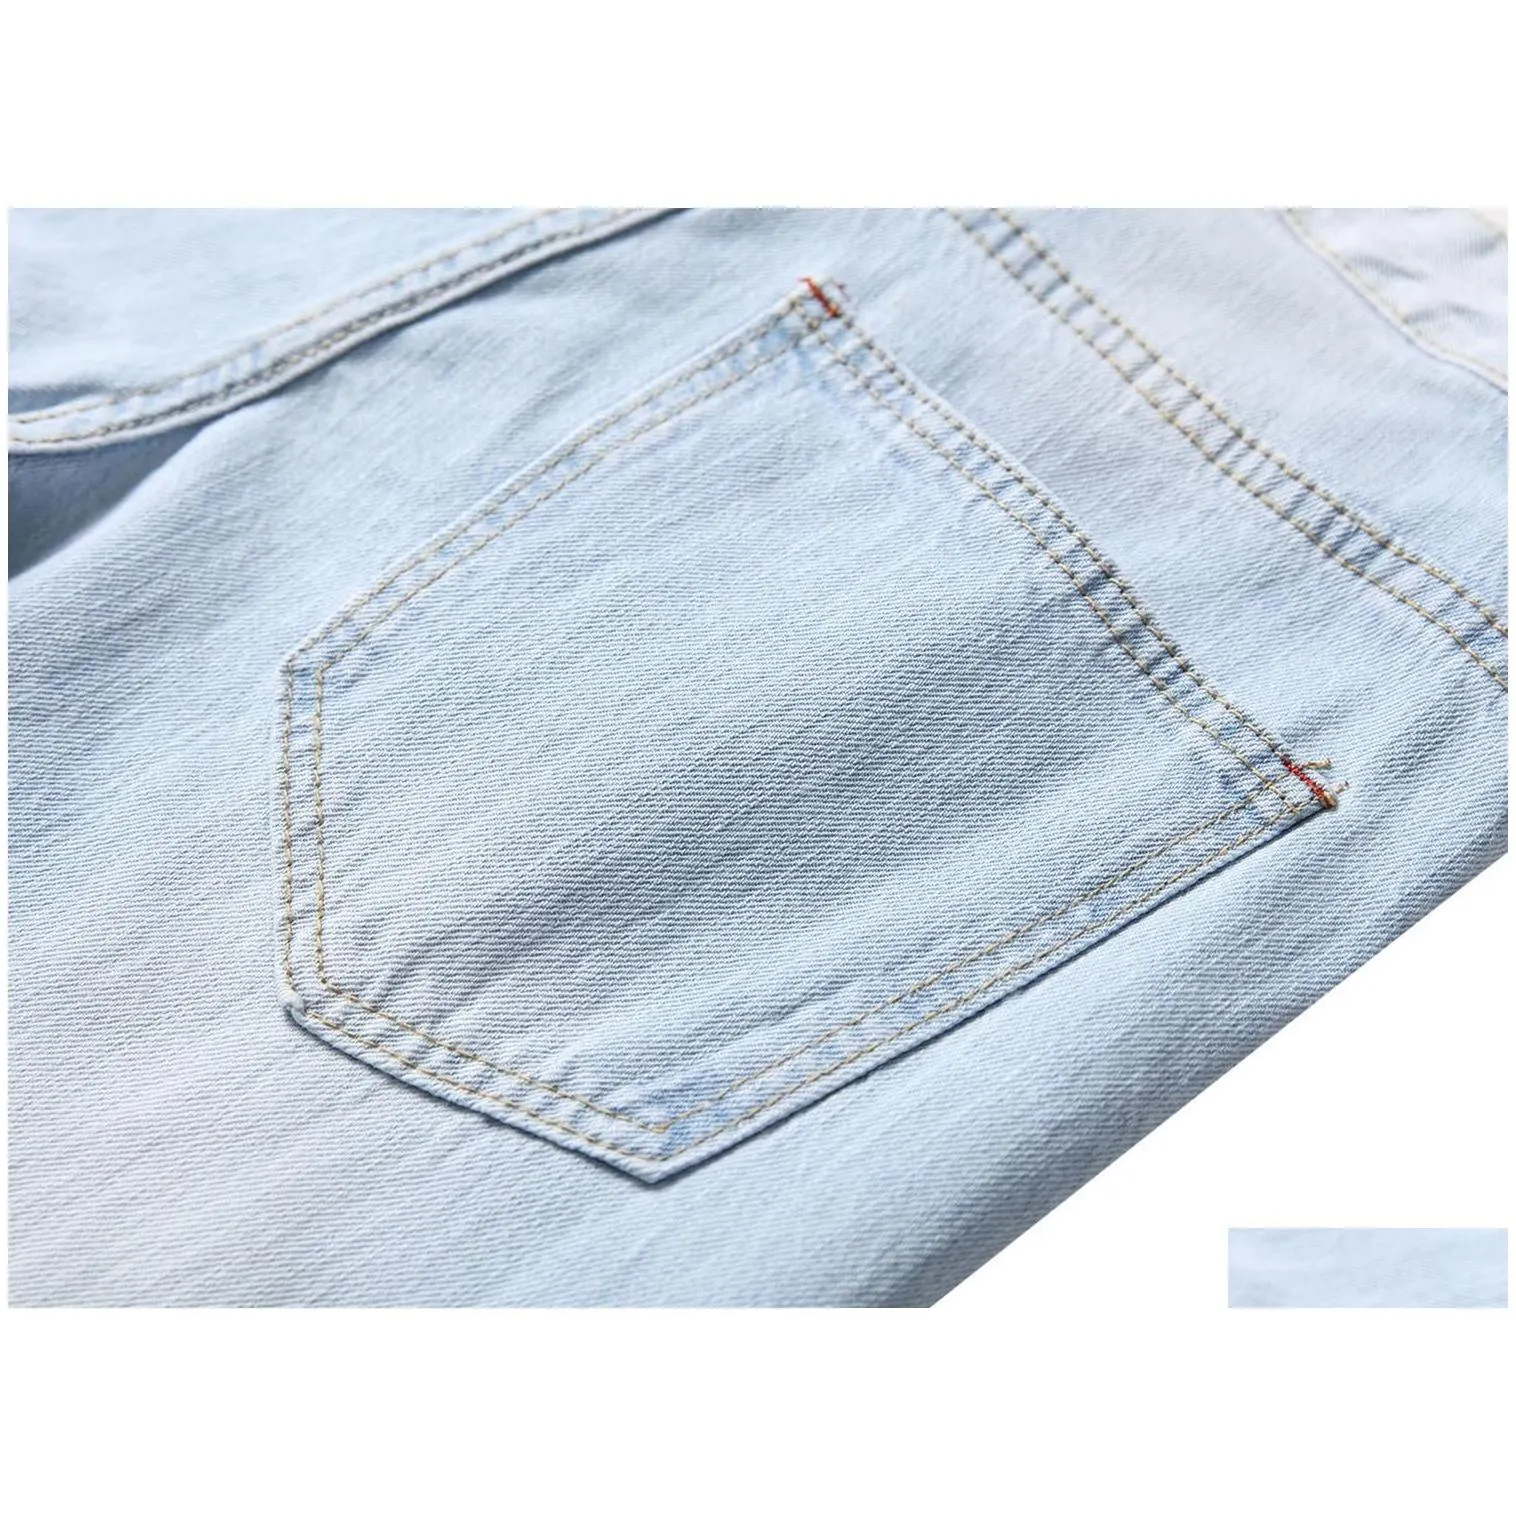 mens jeans mens light color slim fit hole high street blue non-elastic casual fashion urban stretwear drop delivery apparel clothing